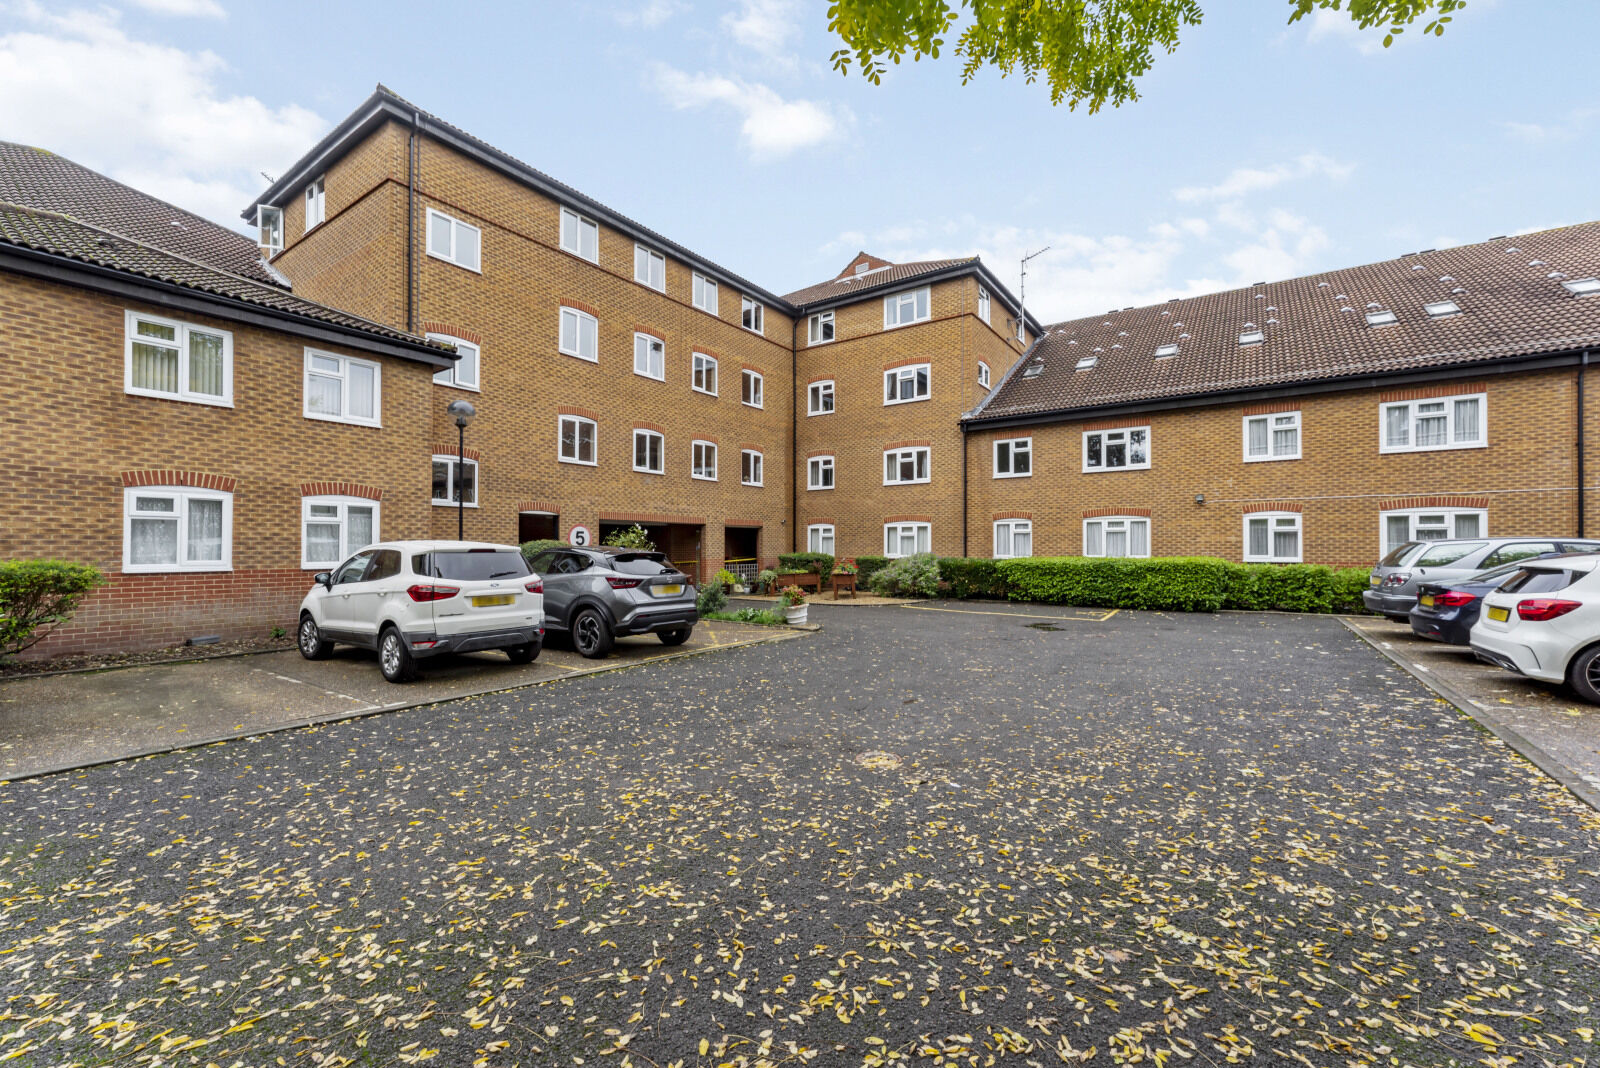 2 bedroom  flat for sale Chatsworth Place, Mitcham, CR4, main image